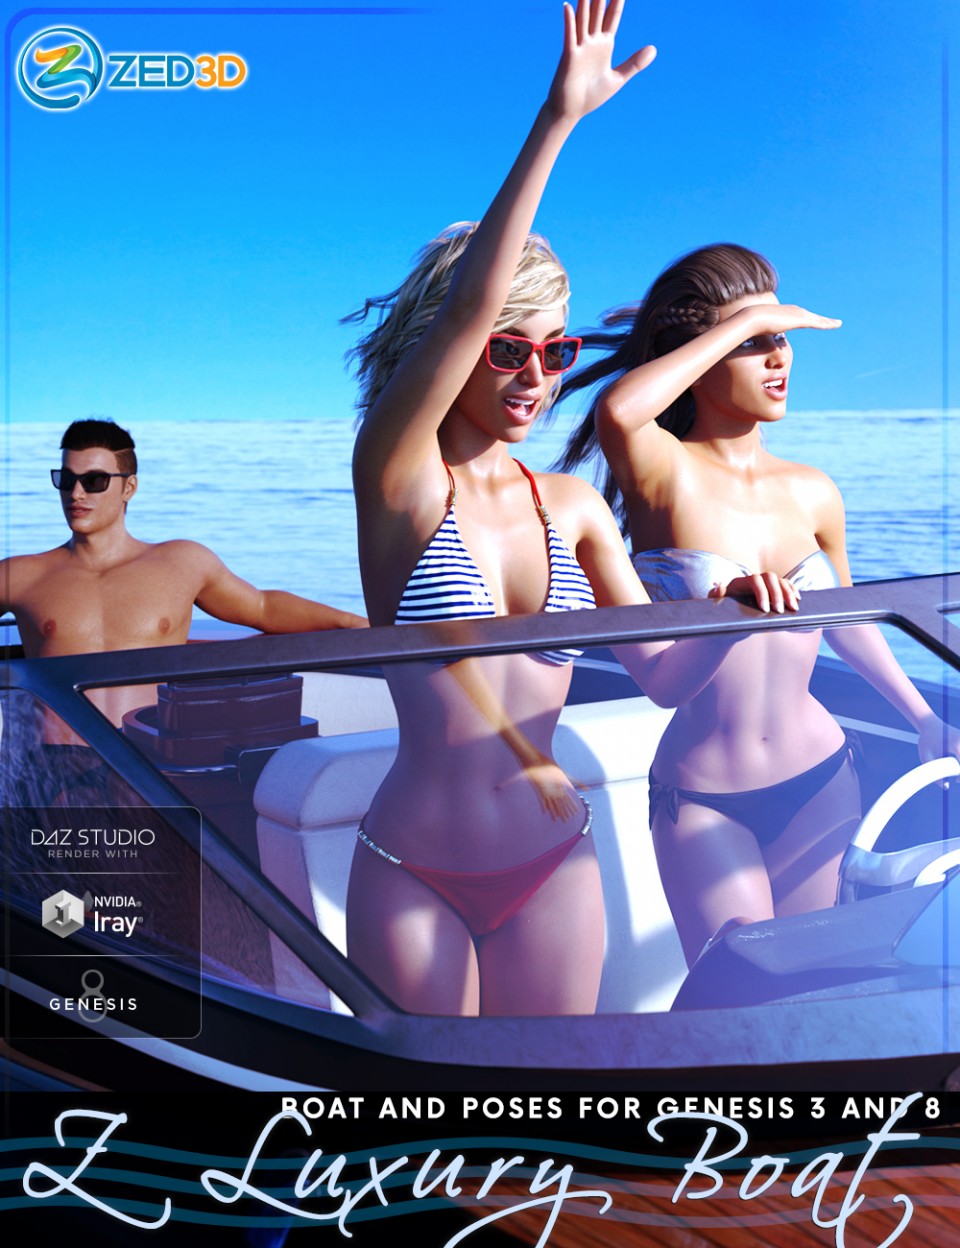 Z Luxury Boat and Poses for Genesis 3 and 8_DAZ3D下载站